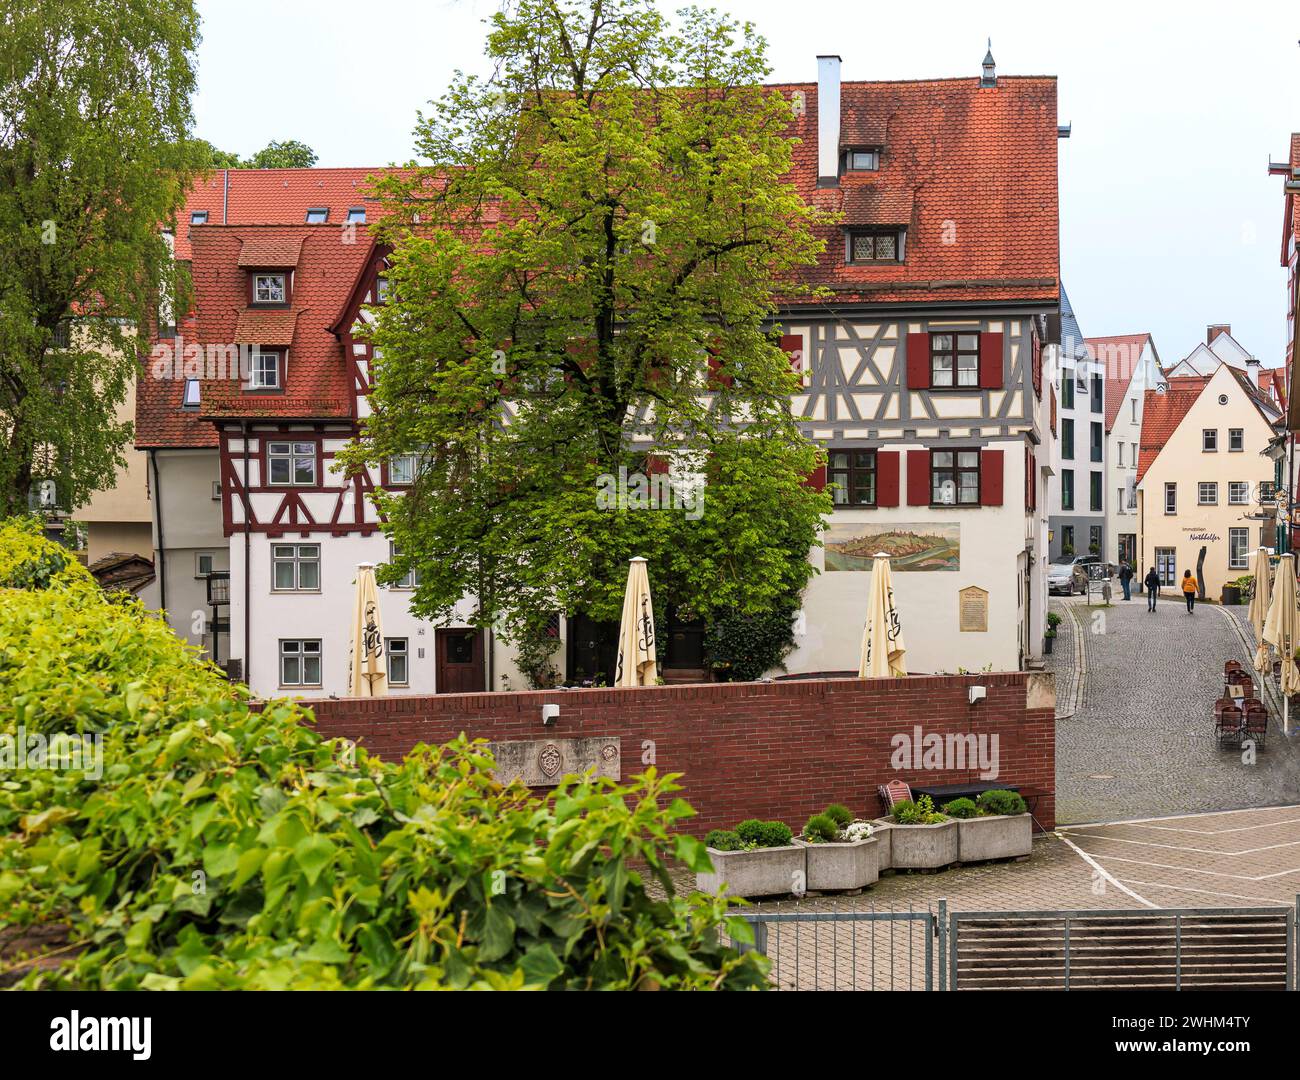 The beautiful house at the fisherman's little square in Ulm's Fishermen's Quarter Stock Photo